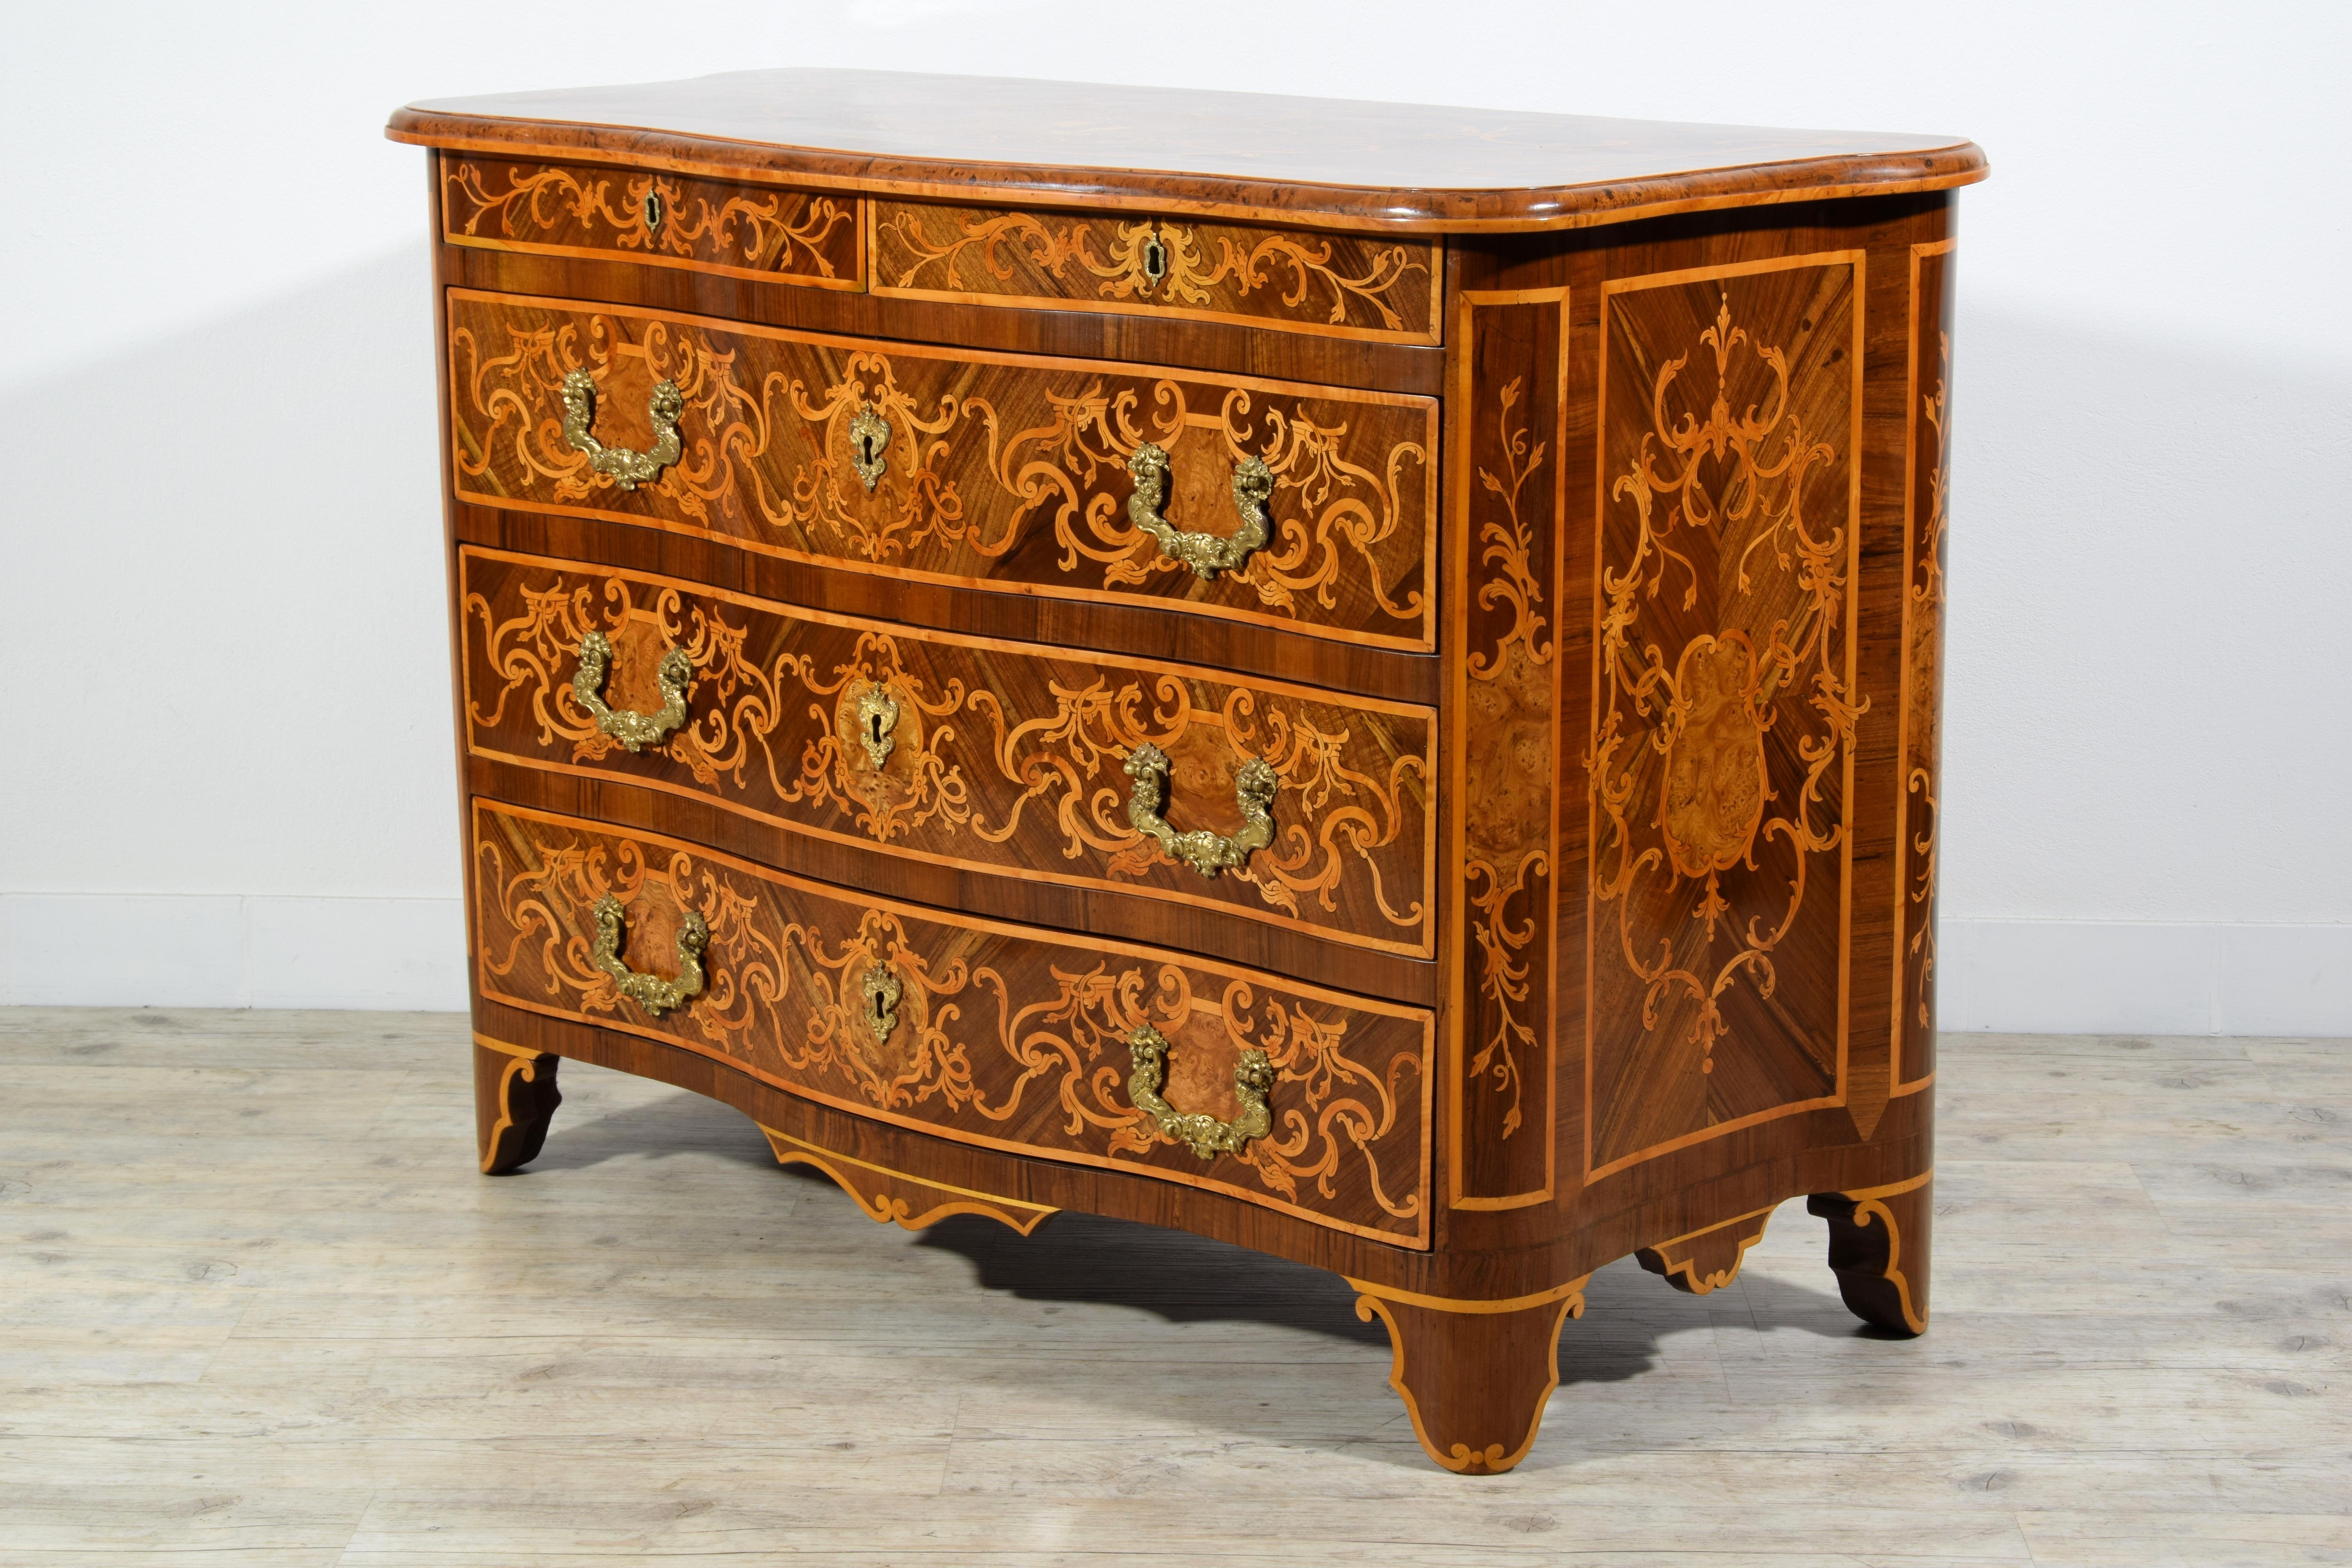 18th Century Italian Paved and Inlaid Wood Chest of Drawers 7